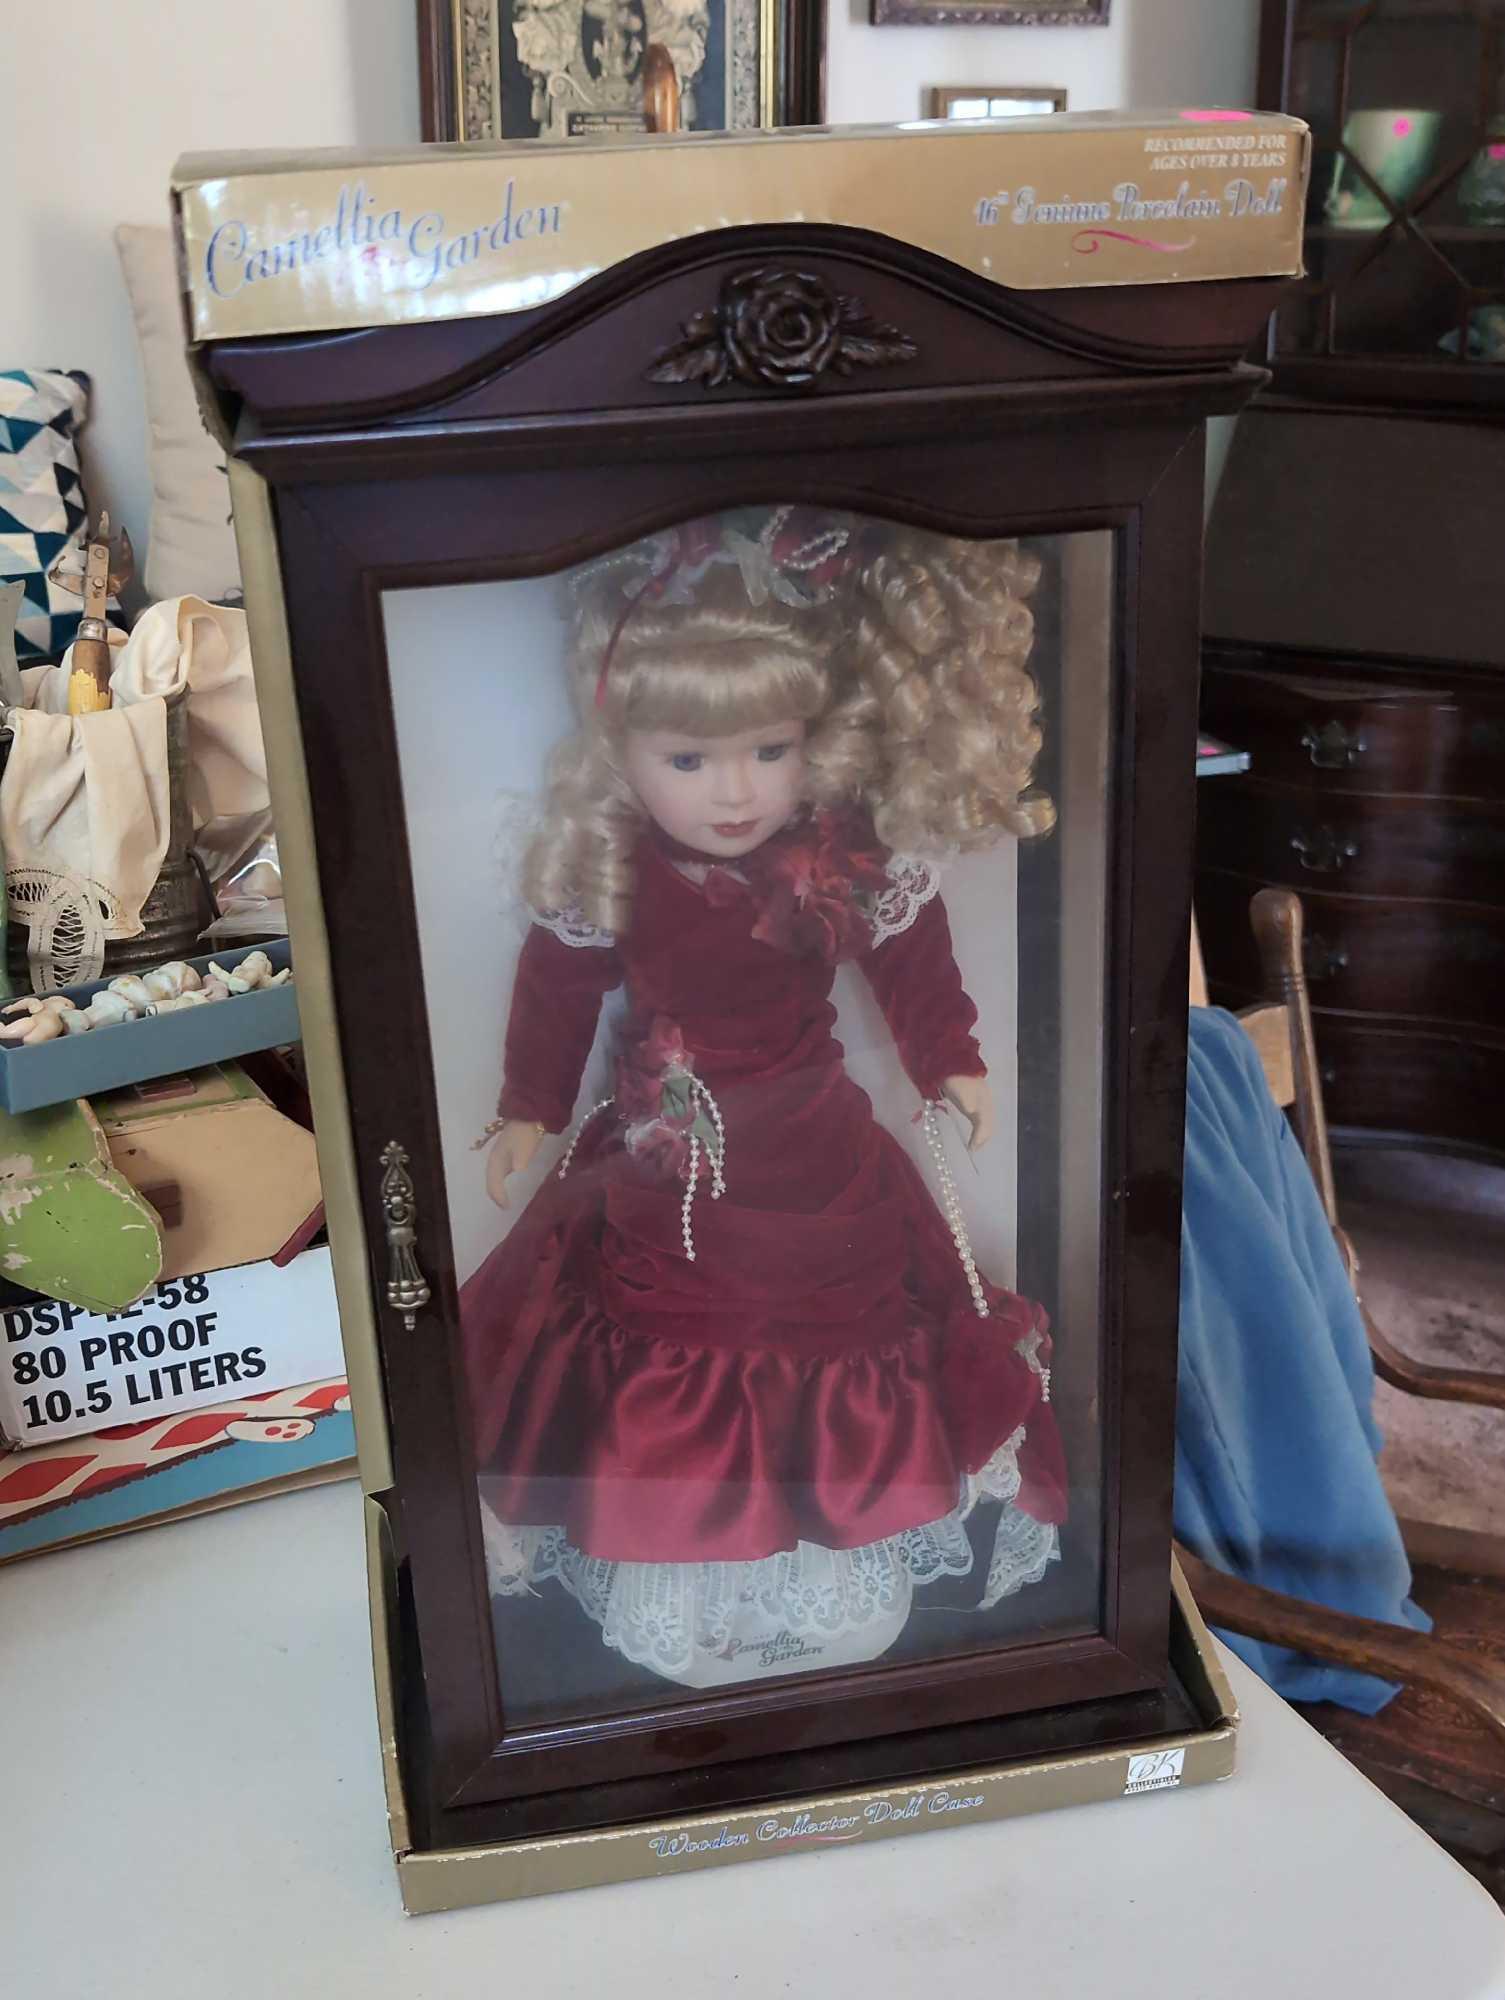 (LR) 1999 CAMELLIA GARDEN COLLECTION 16" GENUINE PORCELAIN DOLL WITH WOOD/GLASS DISPLAY CASE. IN